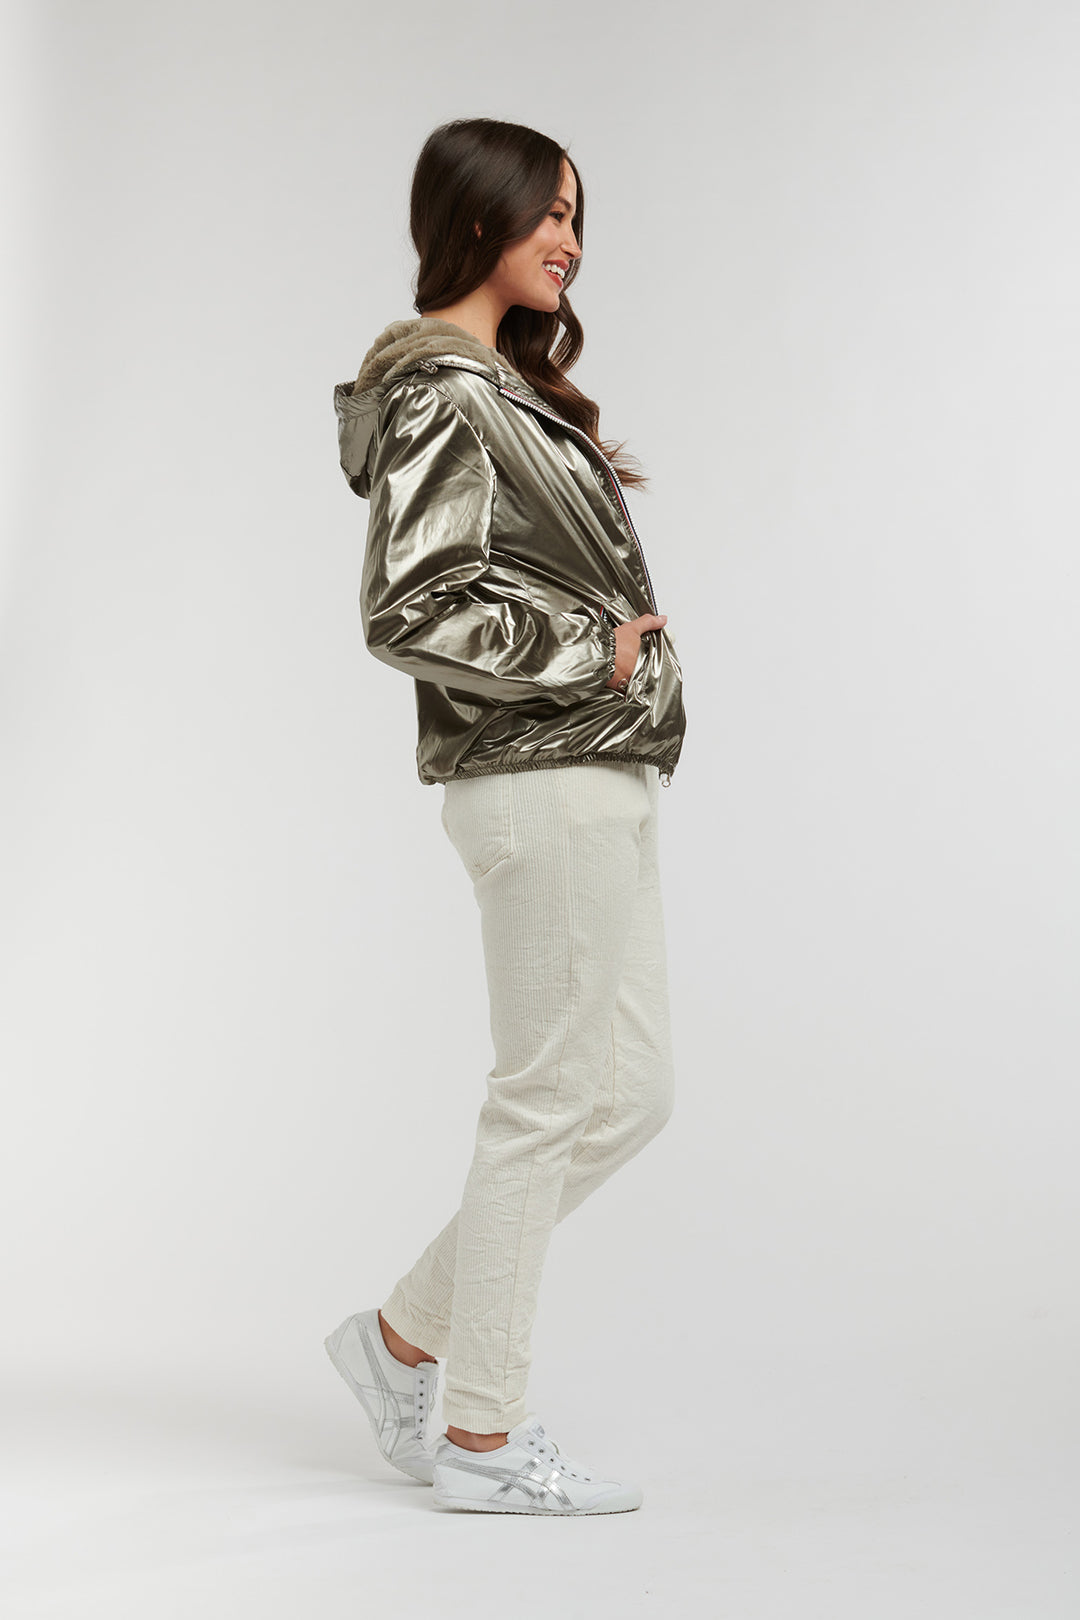 Cosmo Jacket - White Gold - IS28